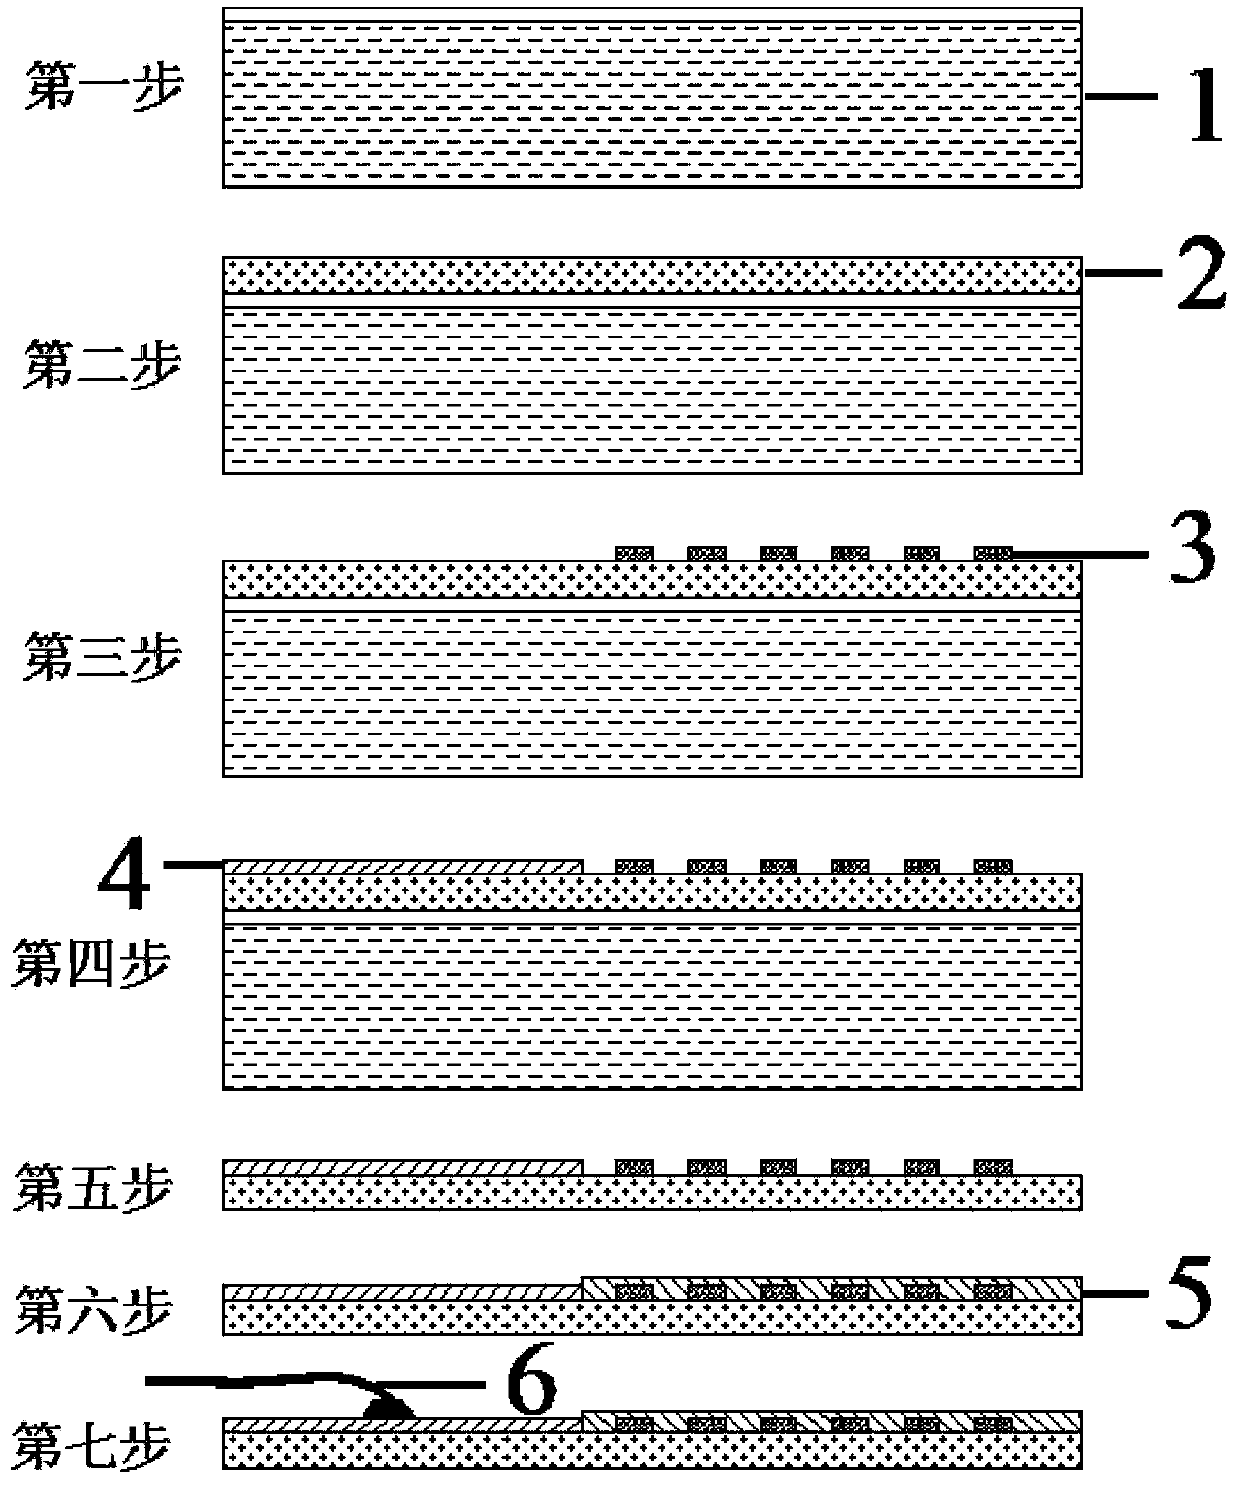 Flexible resistance-type MEMS (micro-electro-mechanical systems) temperature sensor array and preparation method thereof